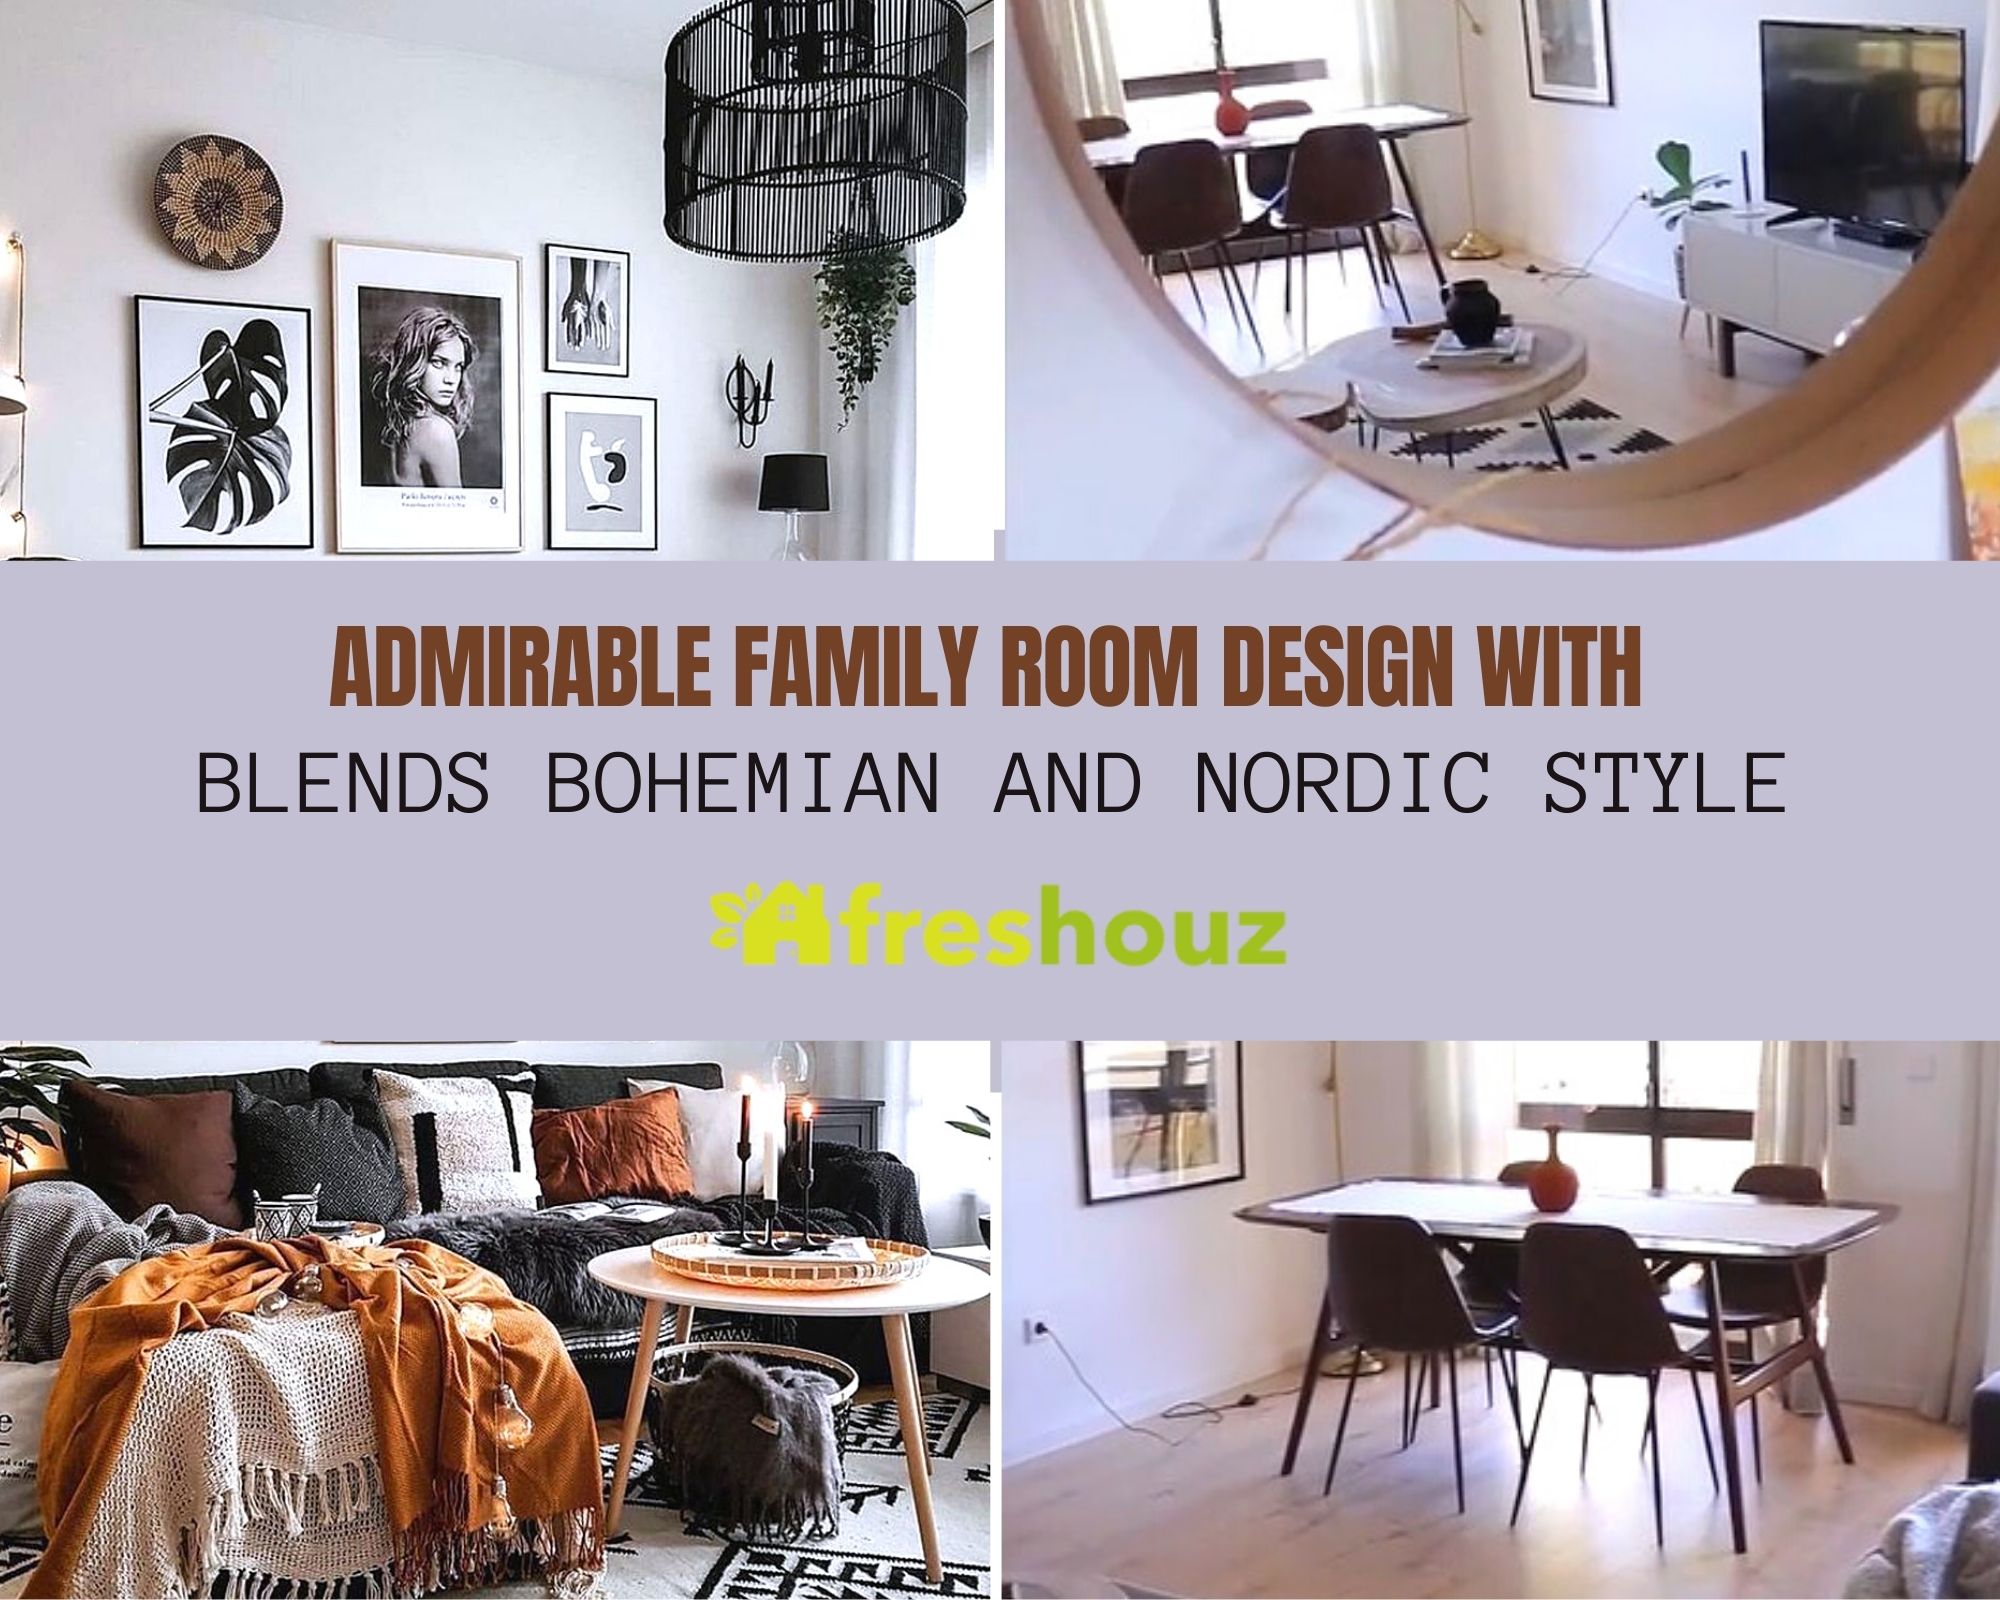 Admirable Family Room Design With Blends Bohemian And Nordic Style